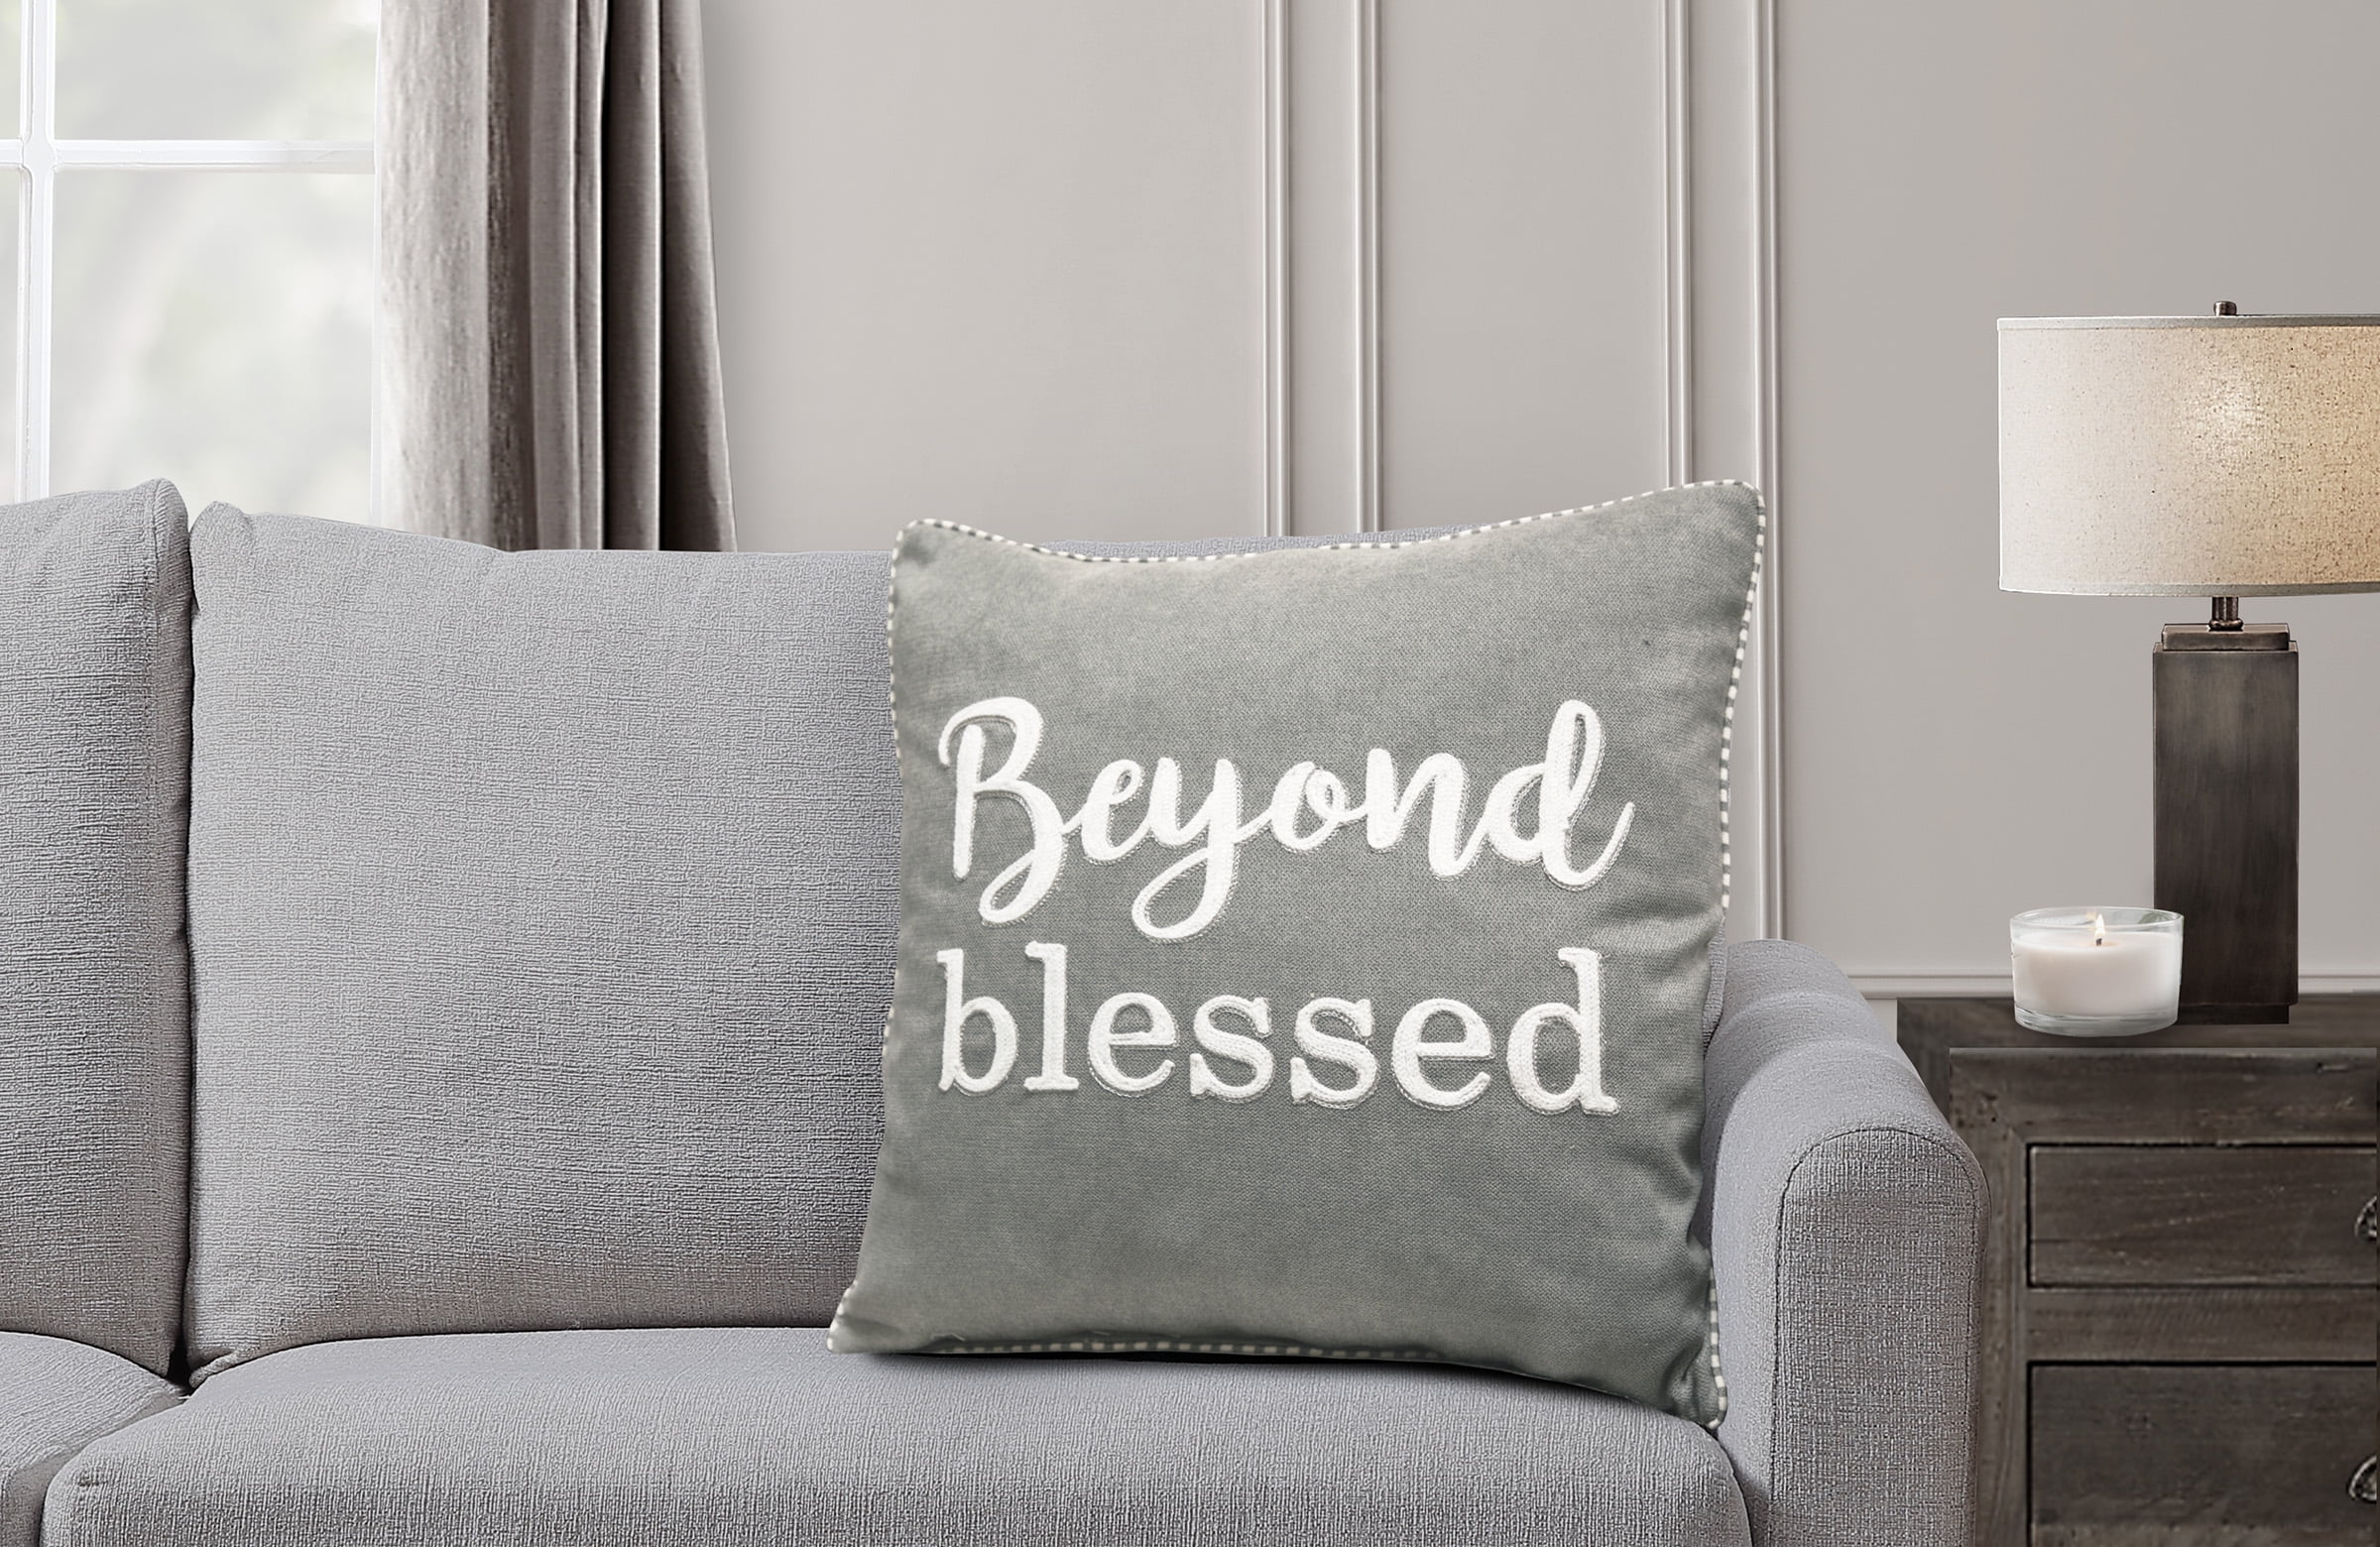 Mainstays Decorative Throw Pillow, Beyond Blessed Sentiment, Square, Grey,  18 x 18, 1Pack 